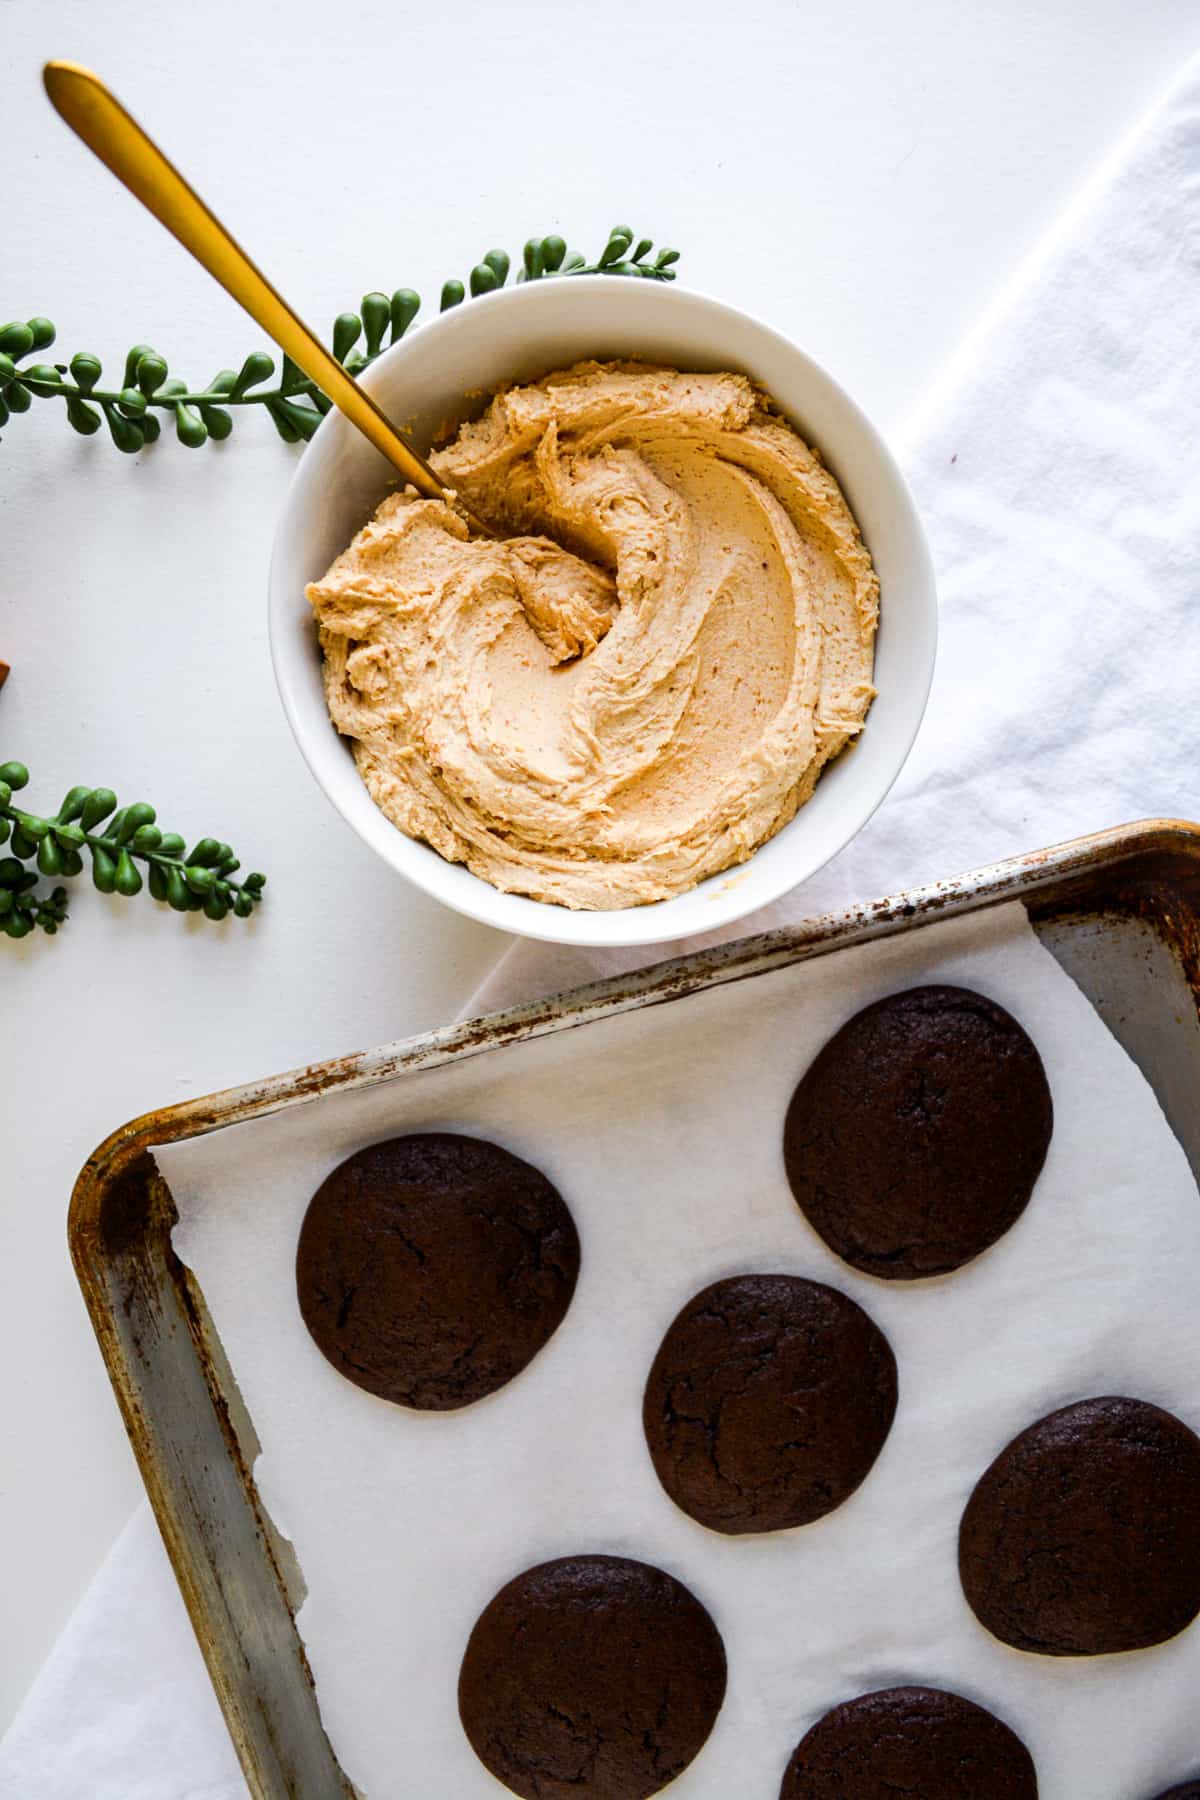 A bowl of Vegan Peanut Butter Frosting next to a tray of chocolate whoopie pies.